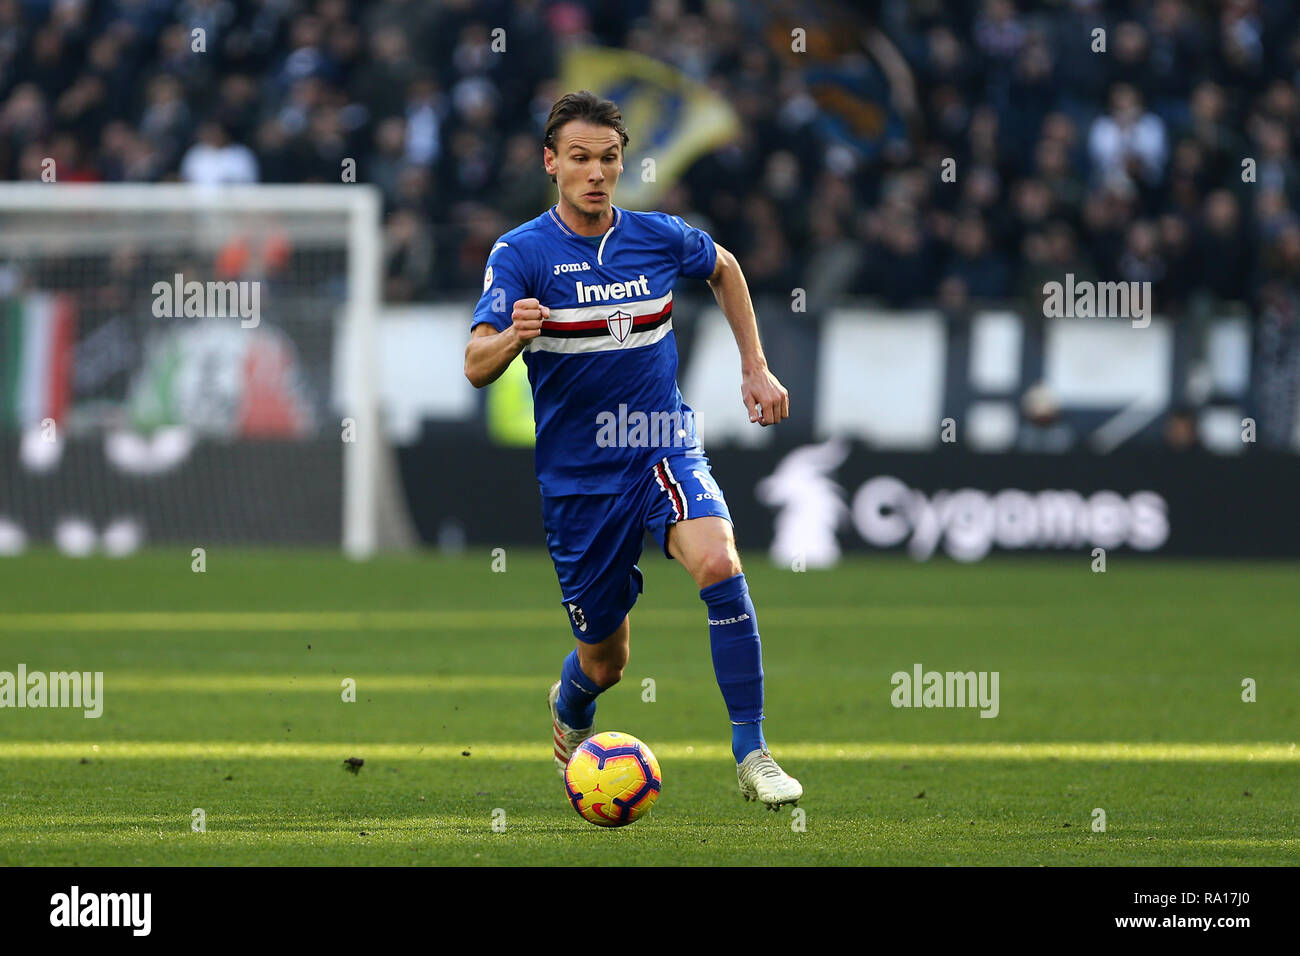 Torino, Italy. 29th October, 2018. Albin Ekdal of Uc Sampdoria  in action during the Serie A football match between Juventus Fc and Uc Sampdoria. Credit: Marco Canoniero/Alamy Live News Stock Photo